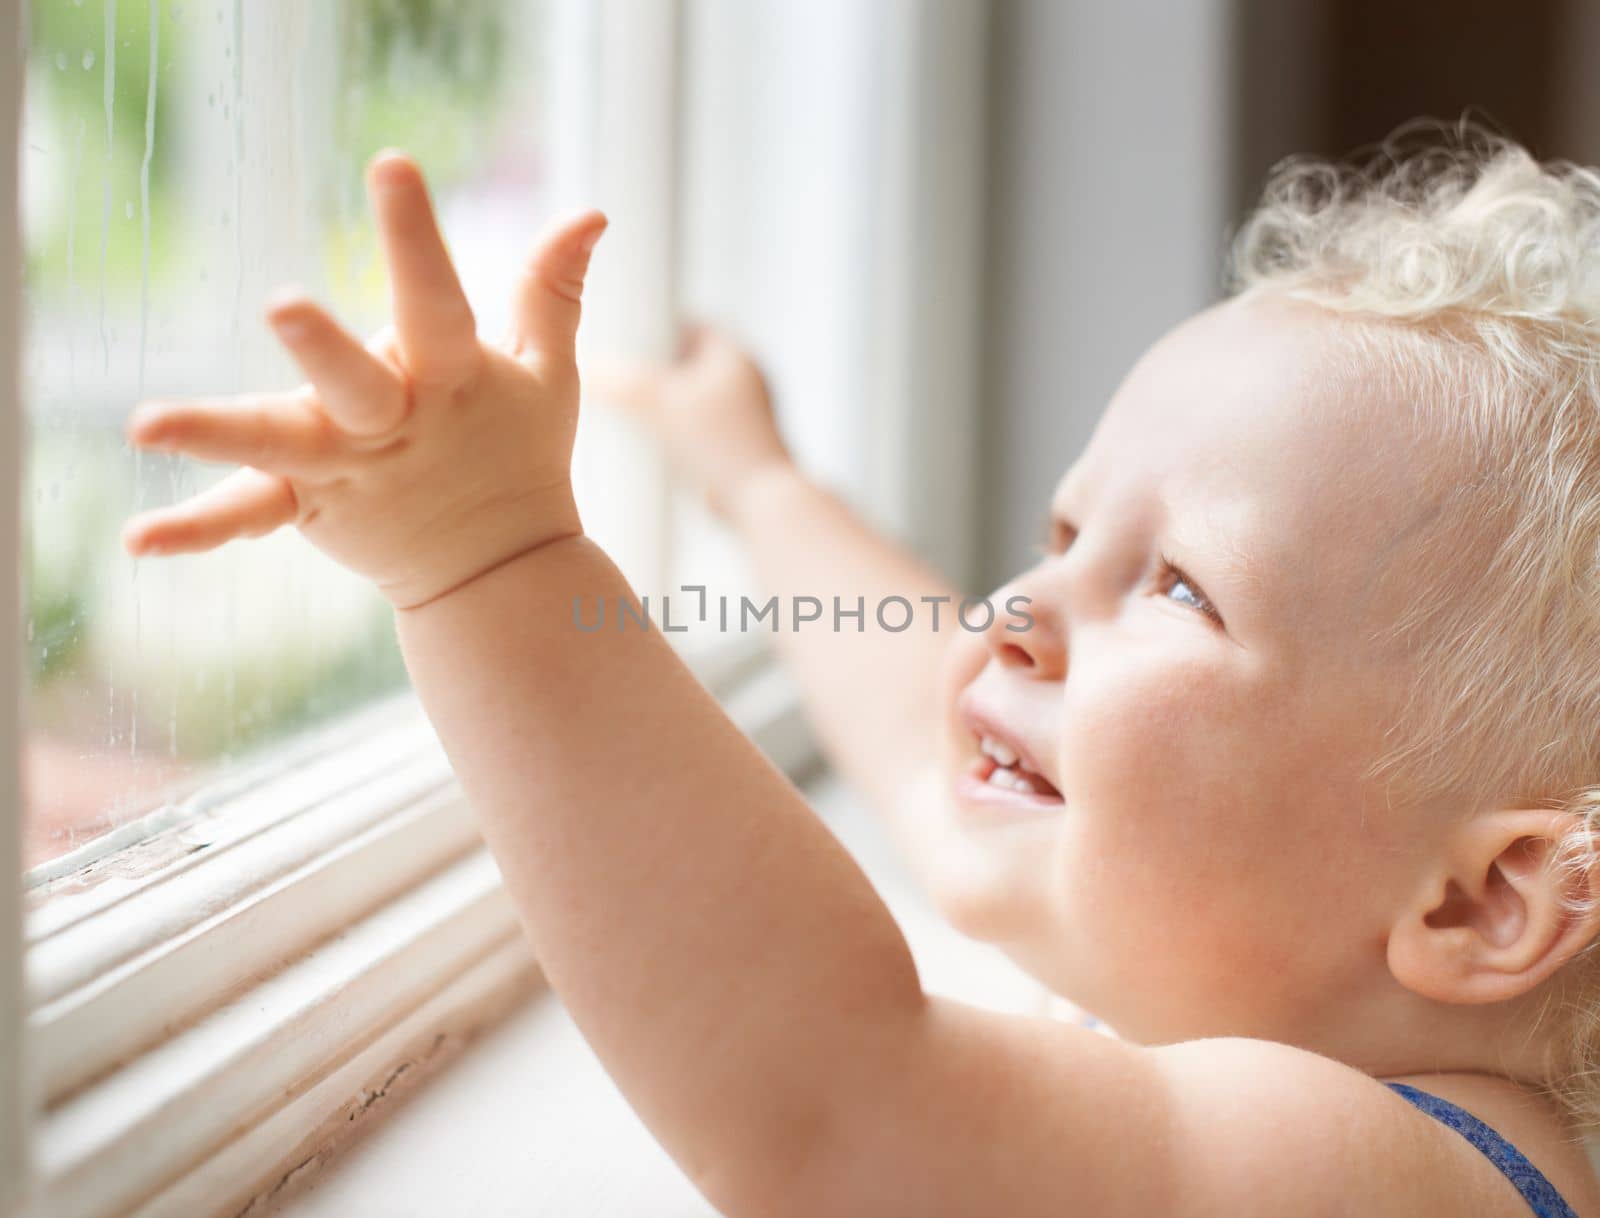 Gazing in wonder at the world. A cute little toddler looking through a window in wonder